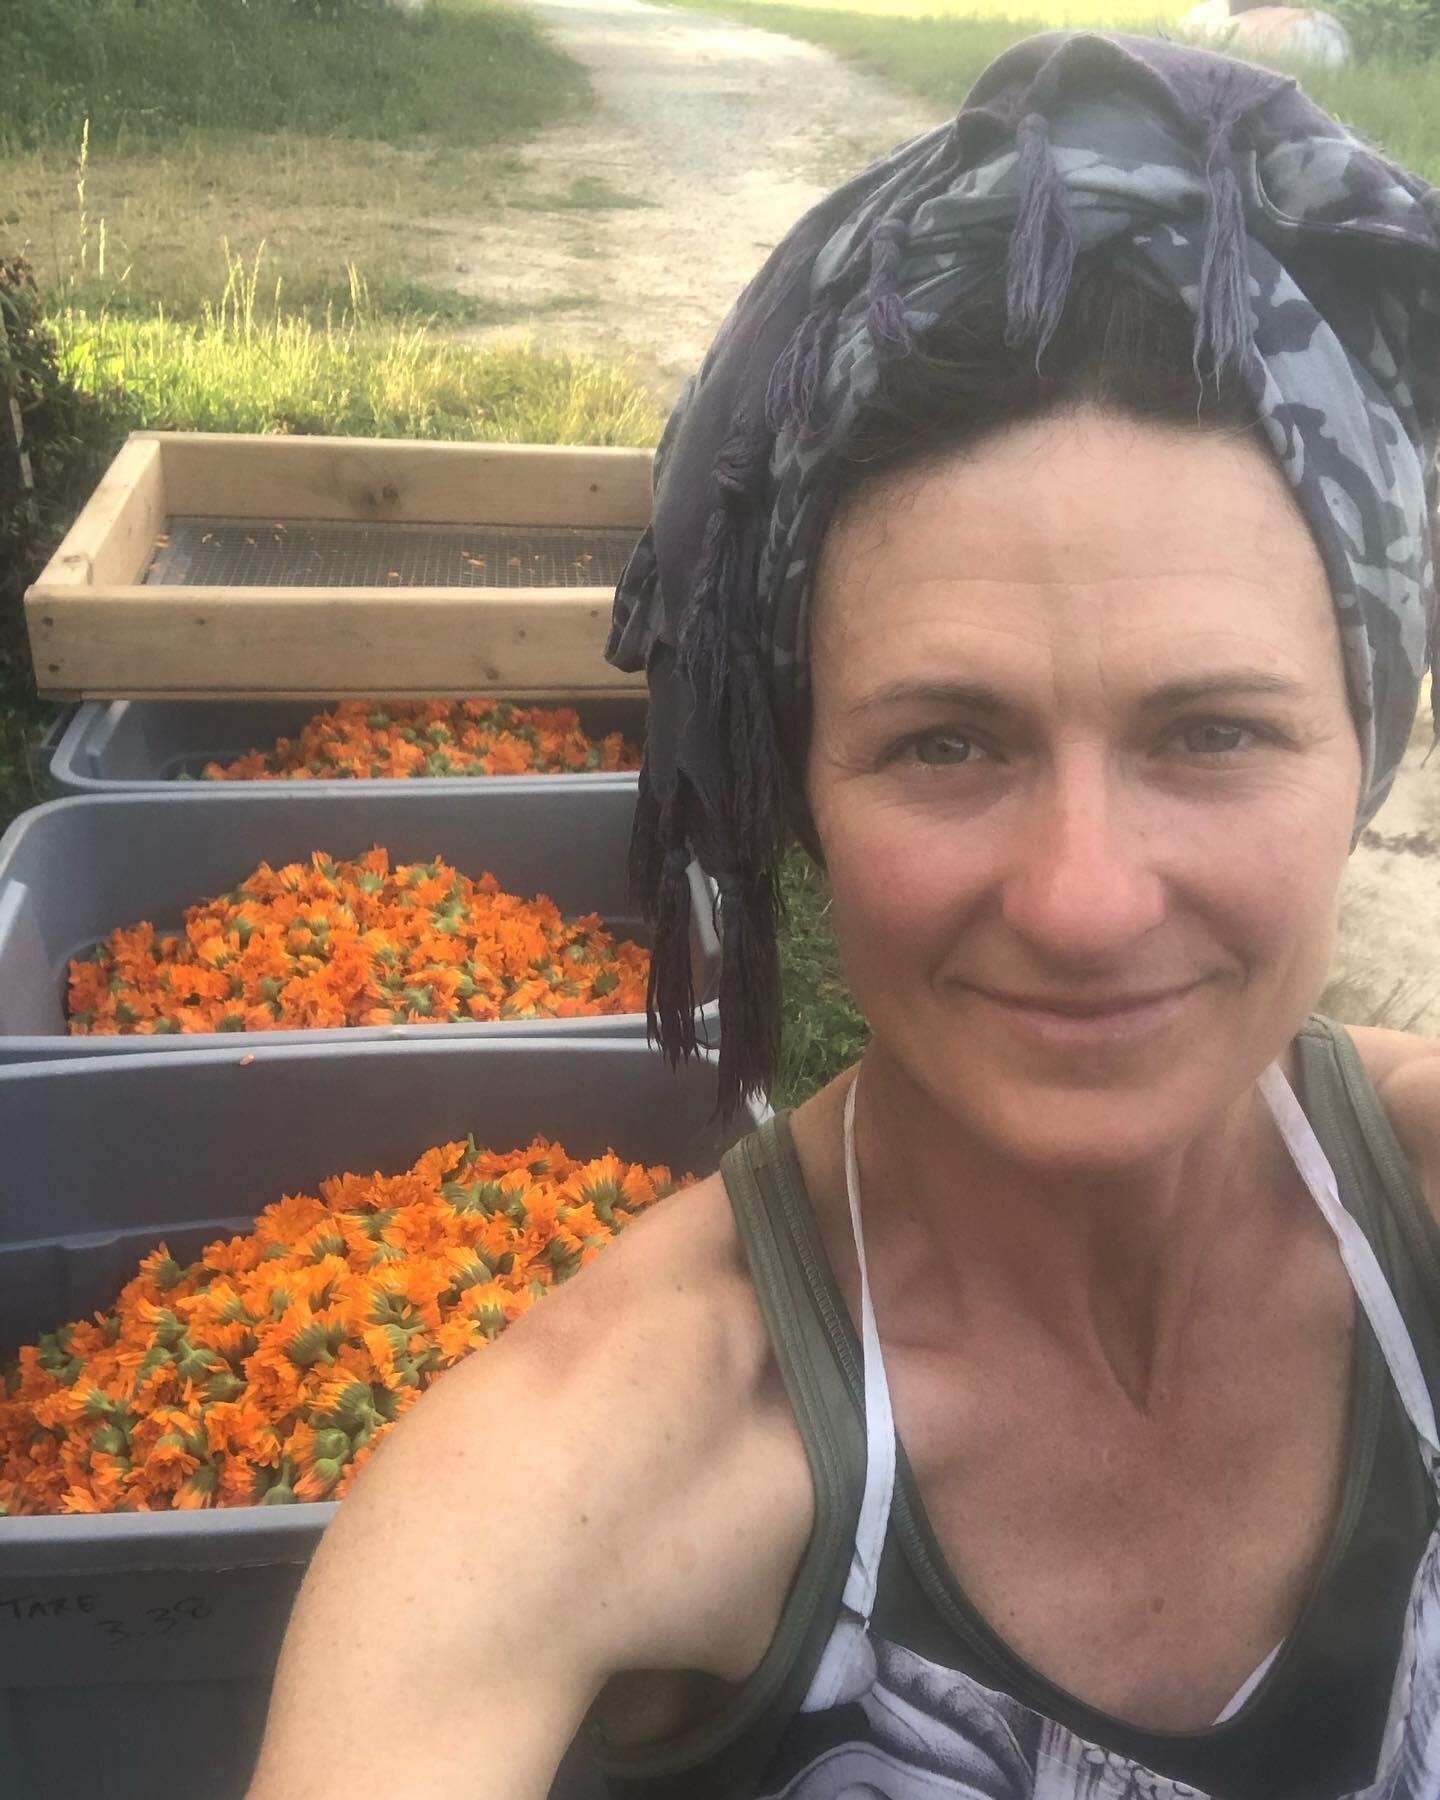 Had to take a quick break for a pond dip before processing today&rsquo;s Calendula harvest - 96lbs fresh (thats aprox 28,800 individually picked blooms!)
🌼
Each harvest is shaken in small batches on screens to remove the plentiful bugs, beetles, and